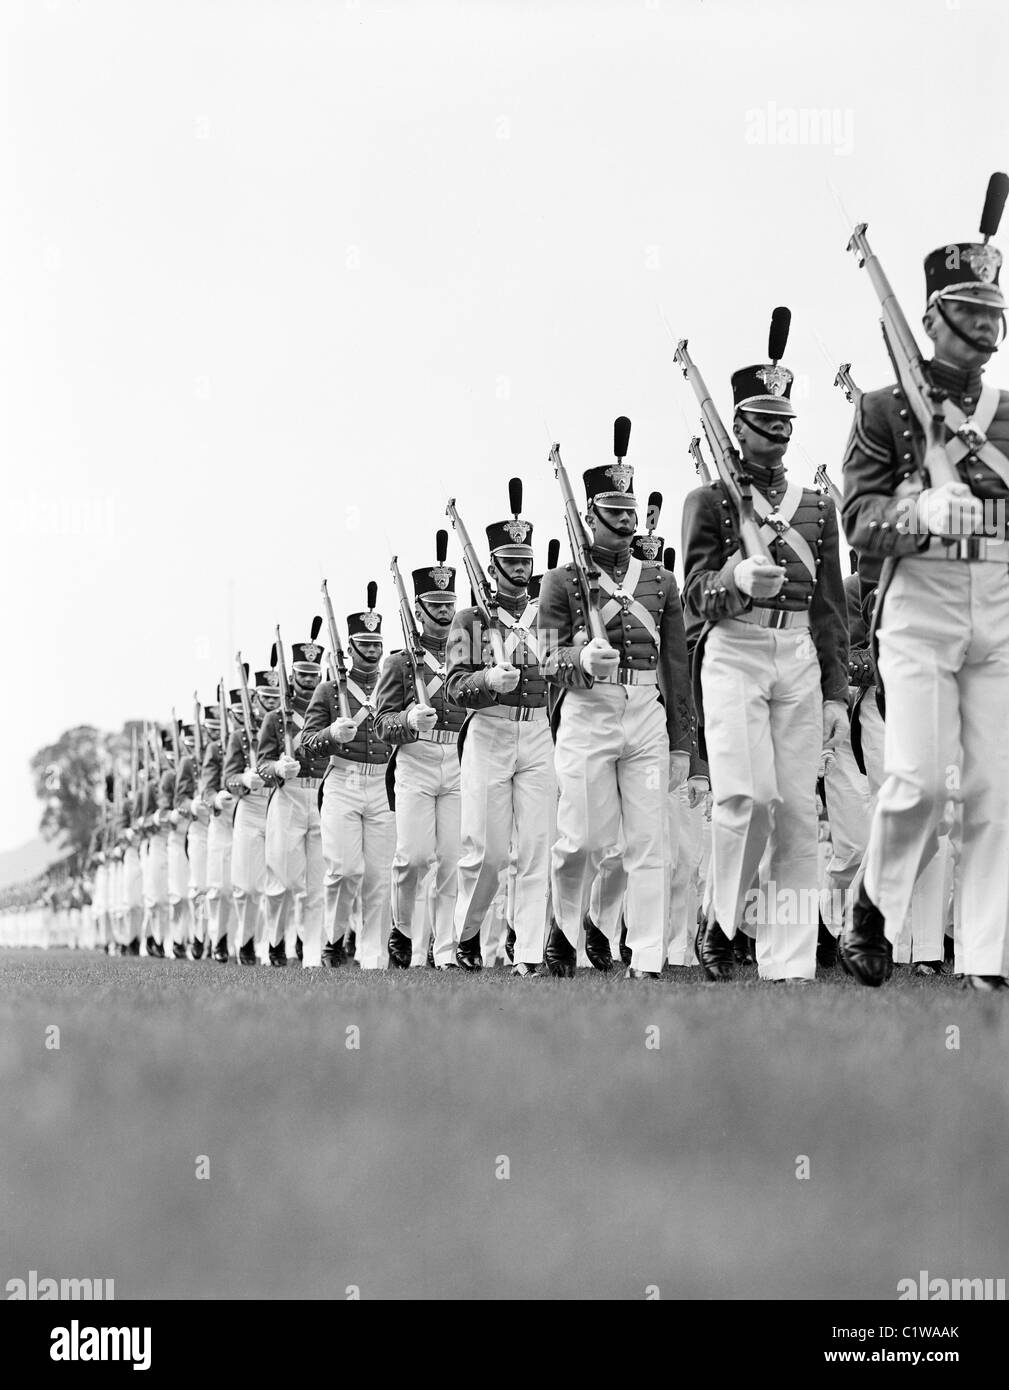 Soldierswearing military uniforms marching in parade formation Stock Photo